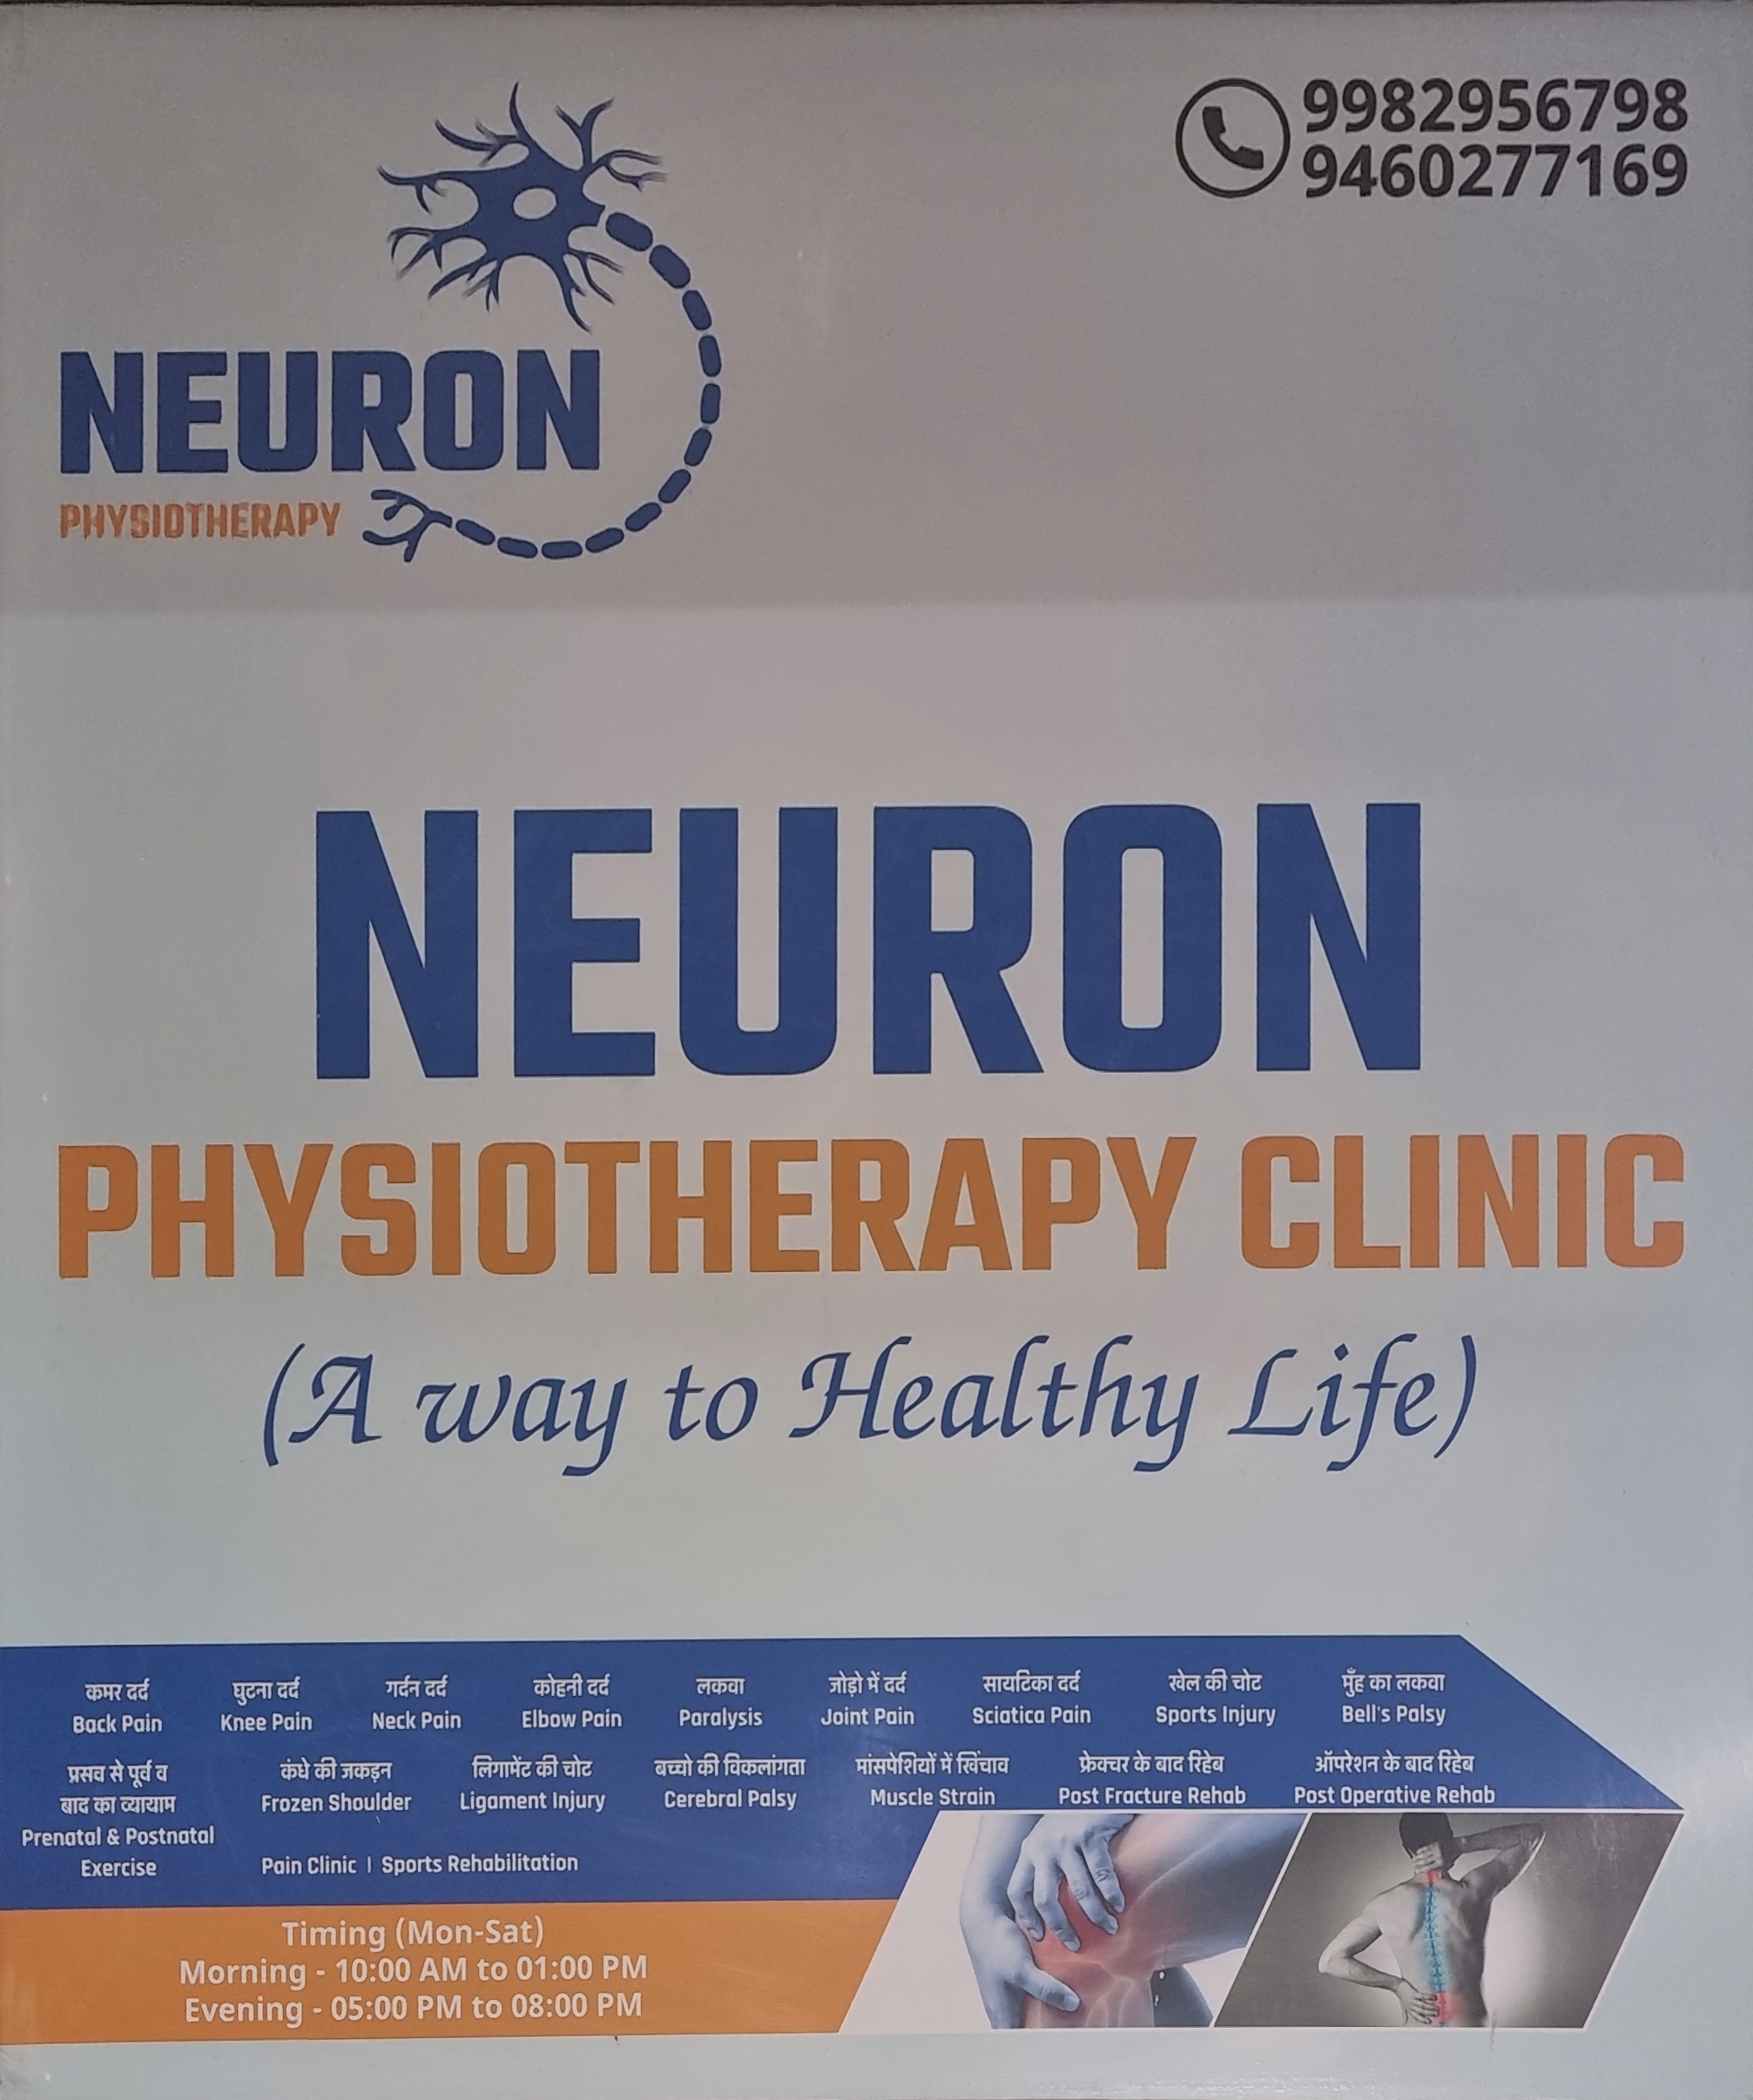 Neuron physiotherapy